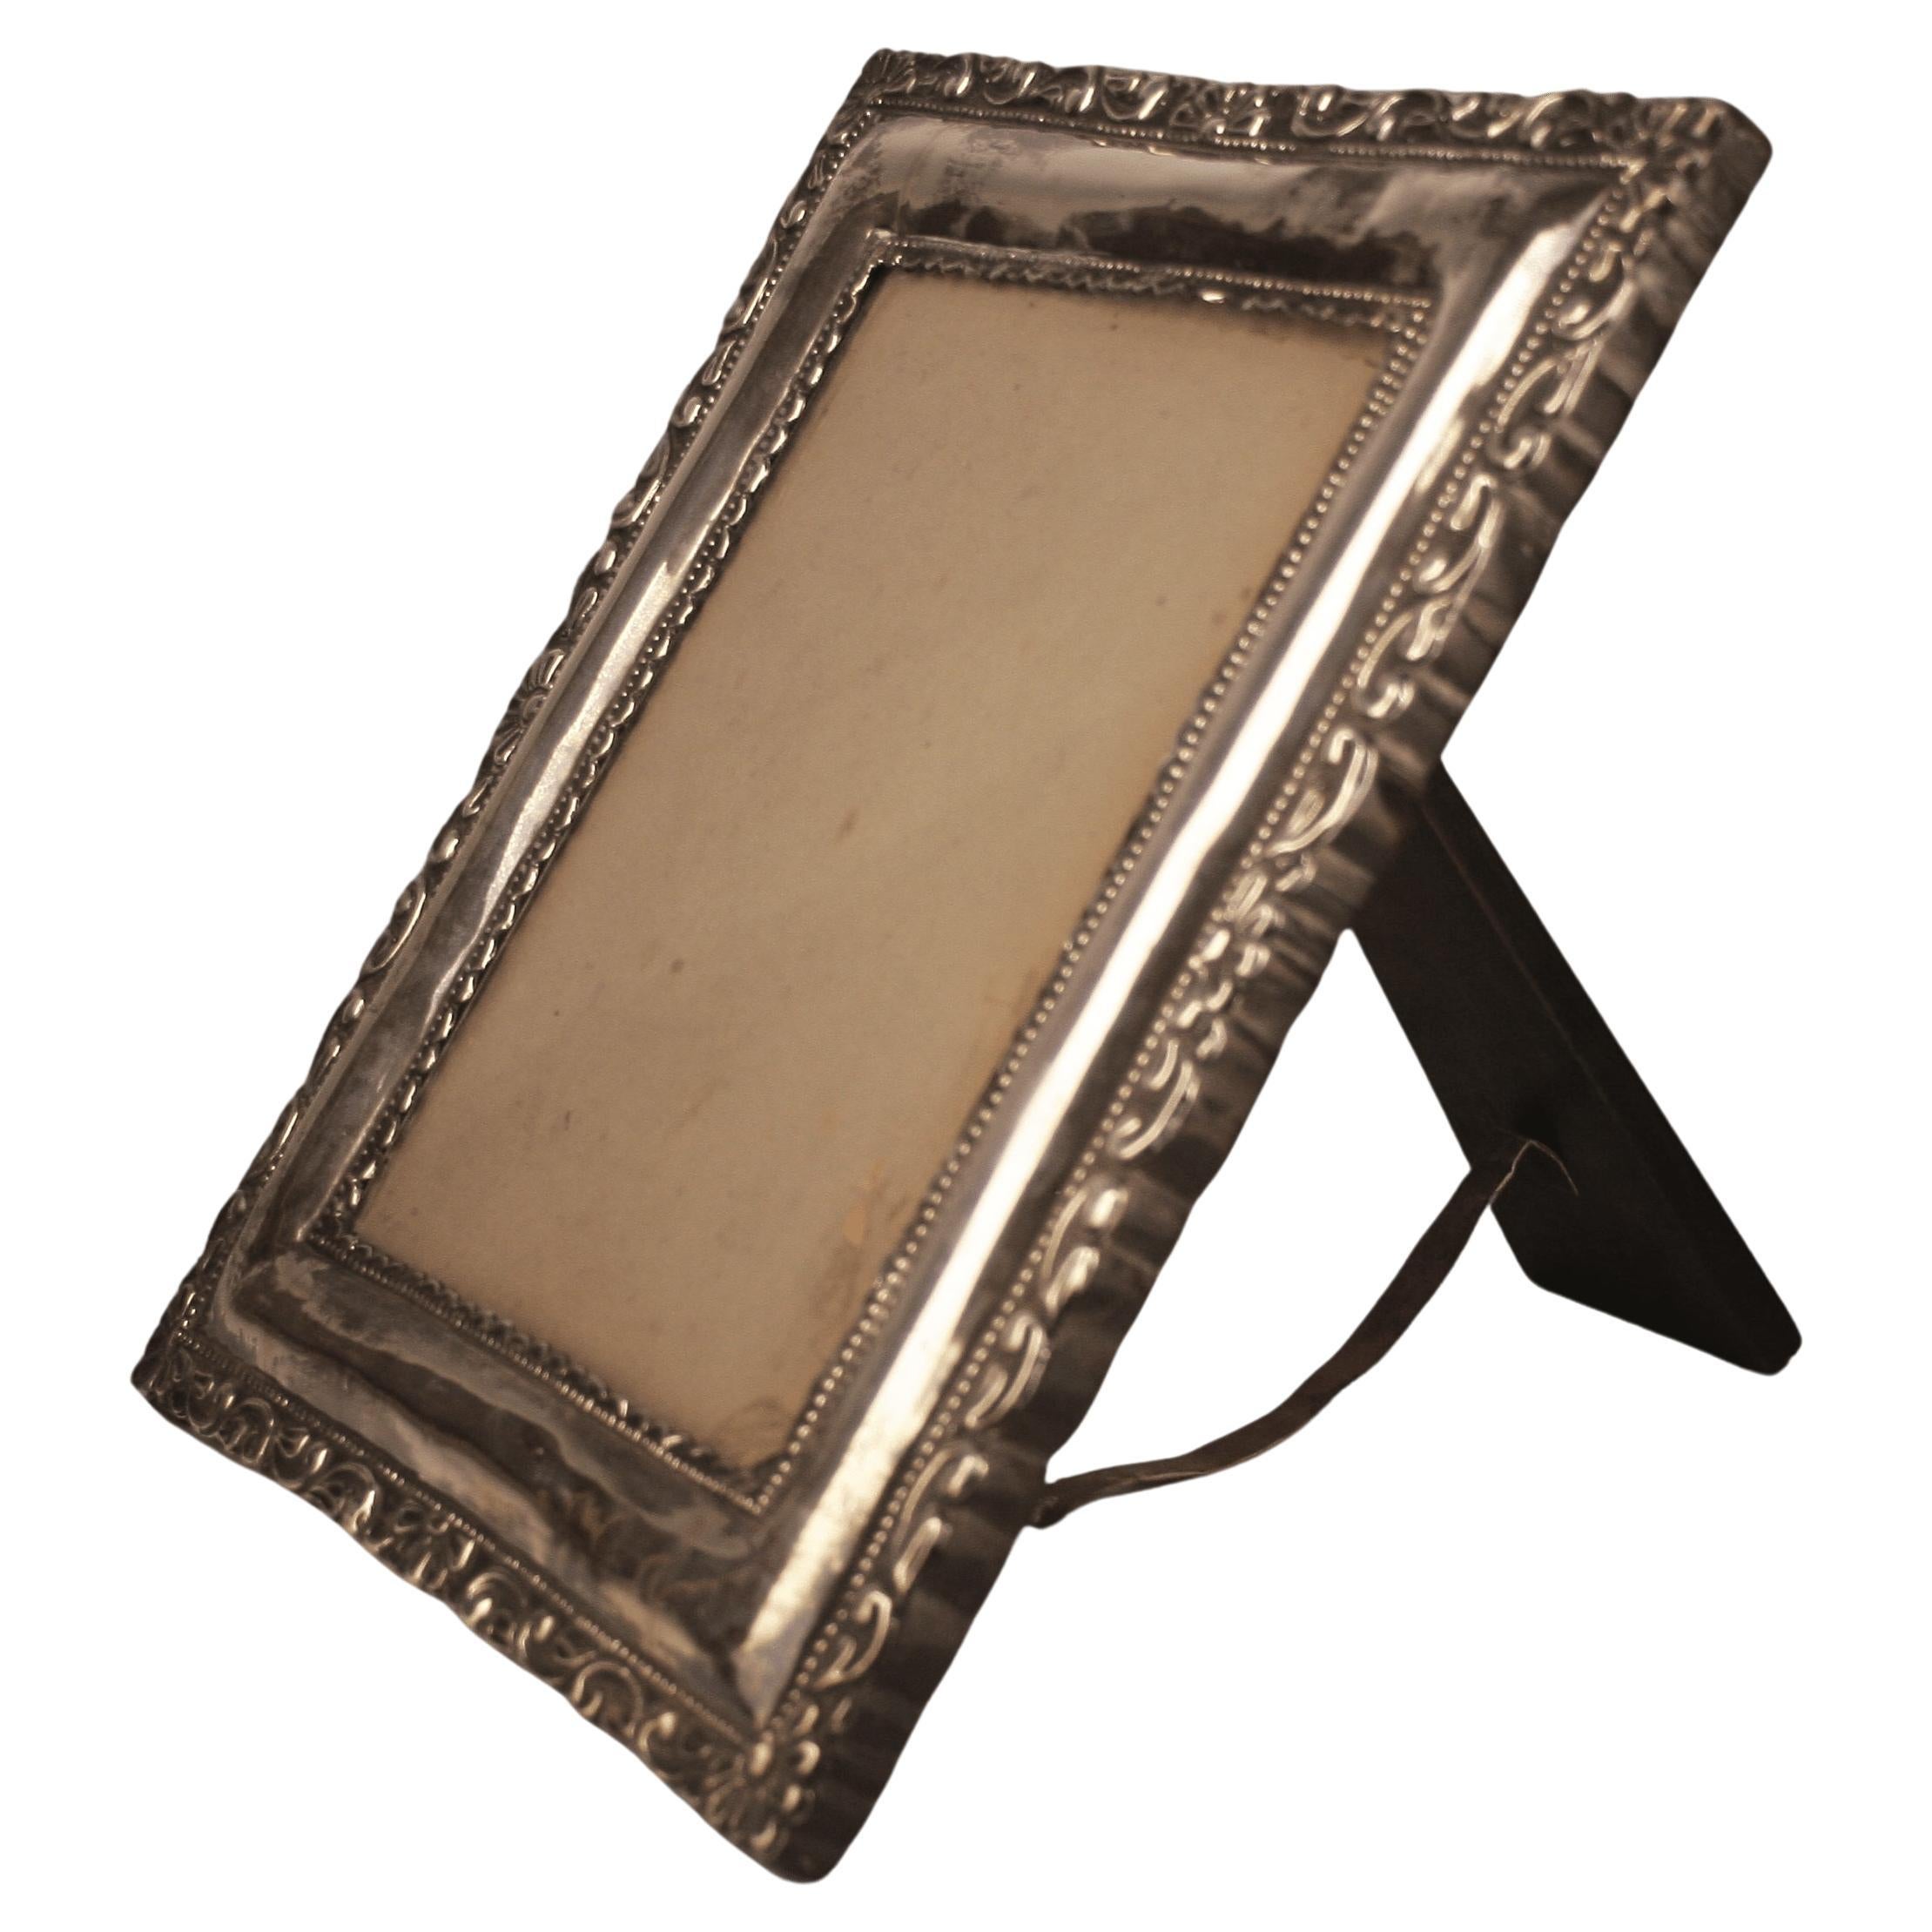 Circa 1900 Neoclassical Wooden Frame with Repoussé Silvered Metal Front Plate